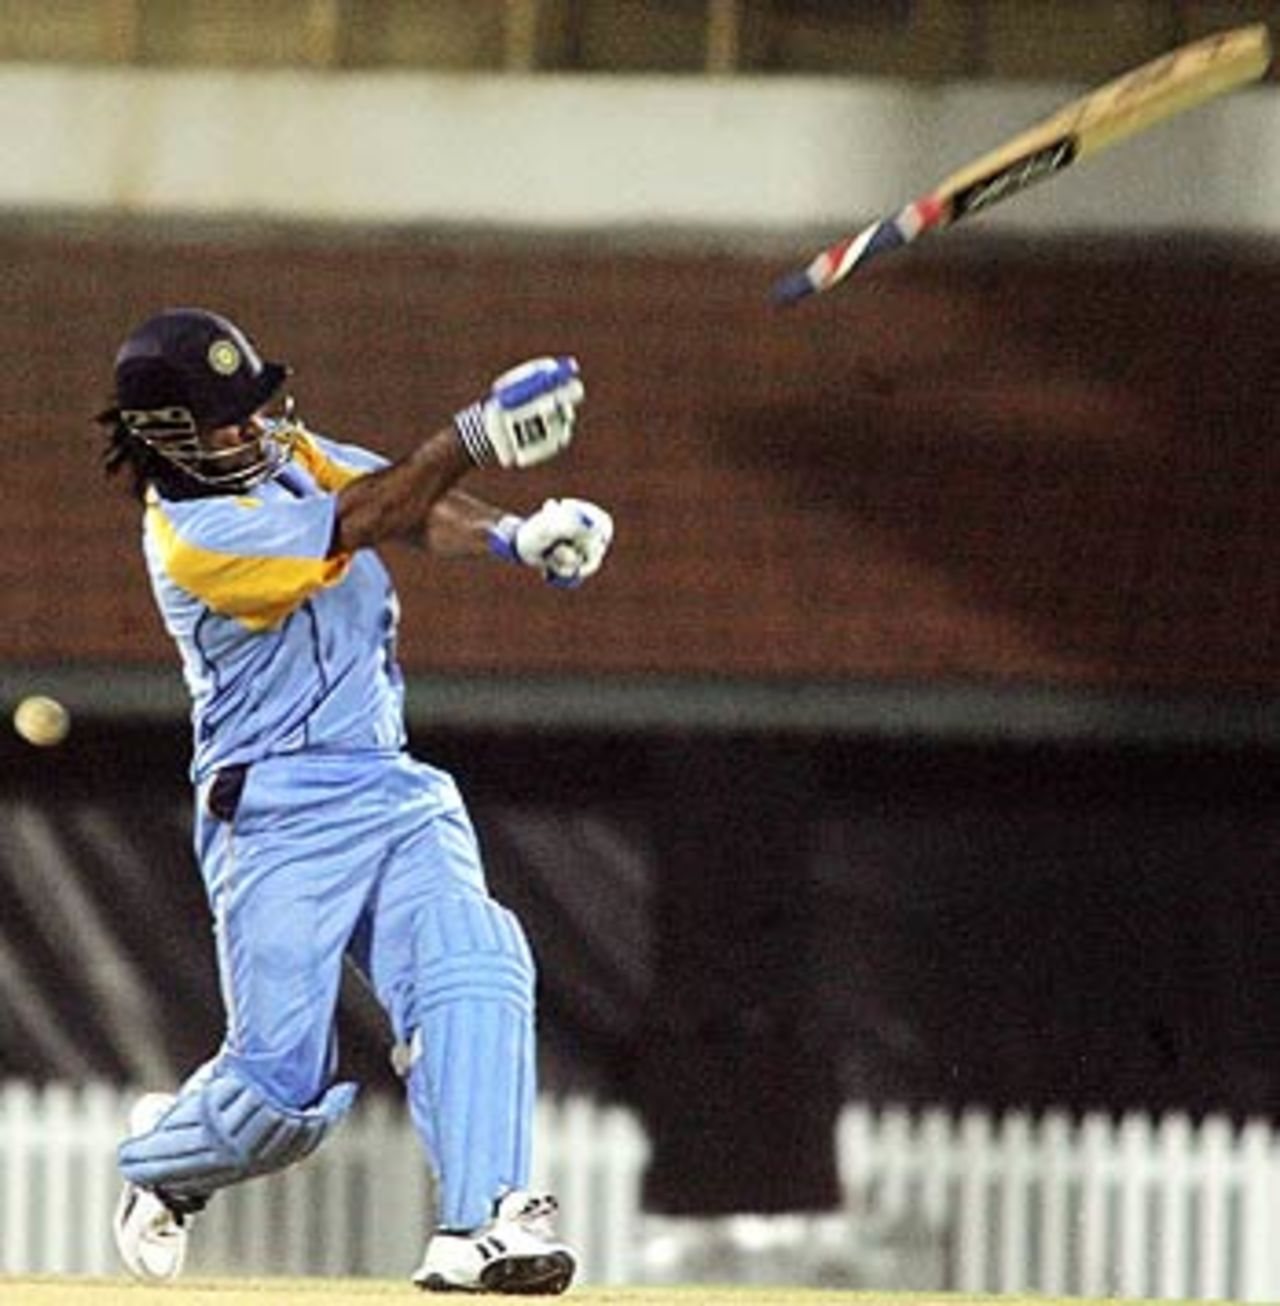 The bat flies off Mahendra Singh Dhoni's gloves while attempting a slog India Blue v India Green, Challenger Series, Chennai, October 2, 2006